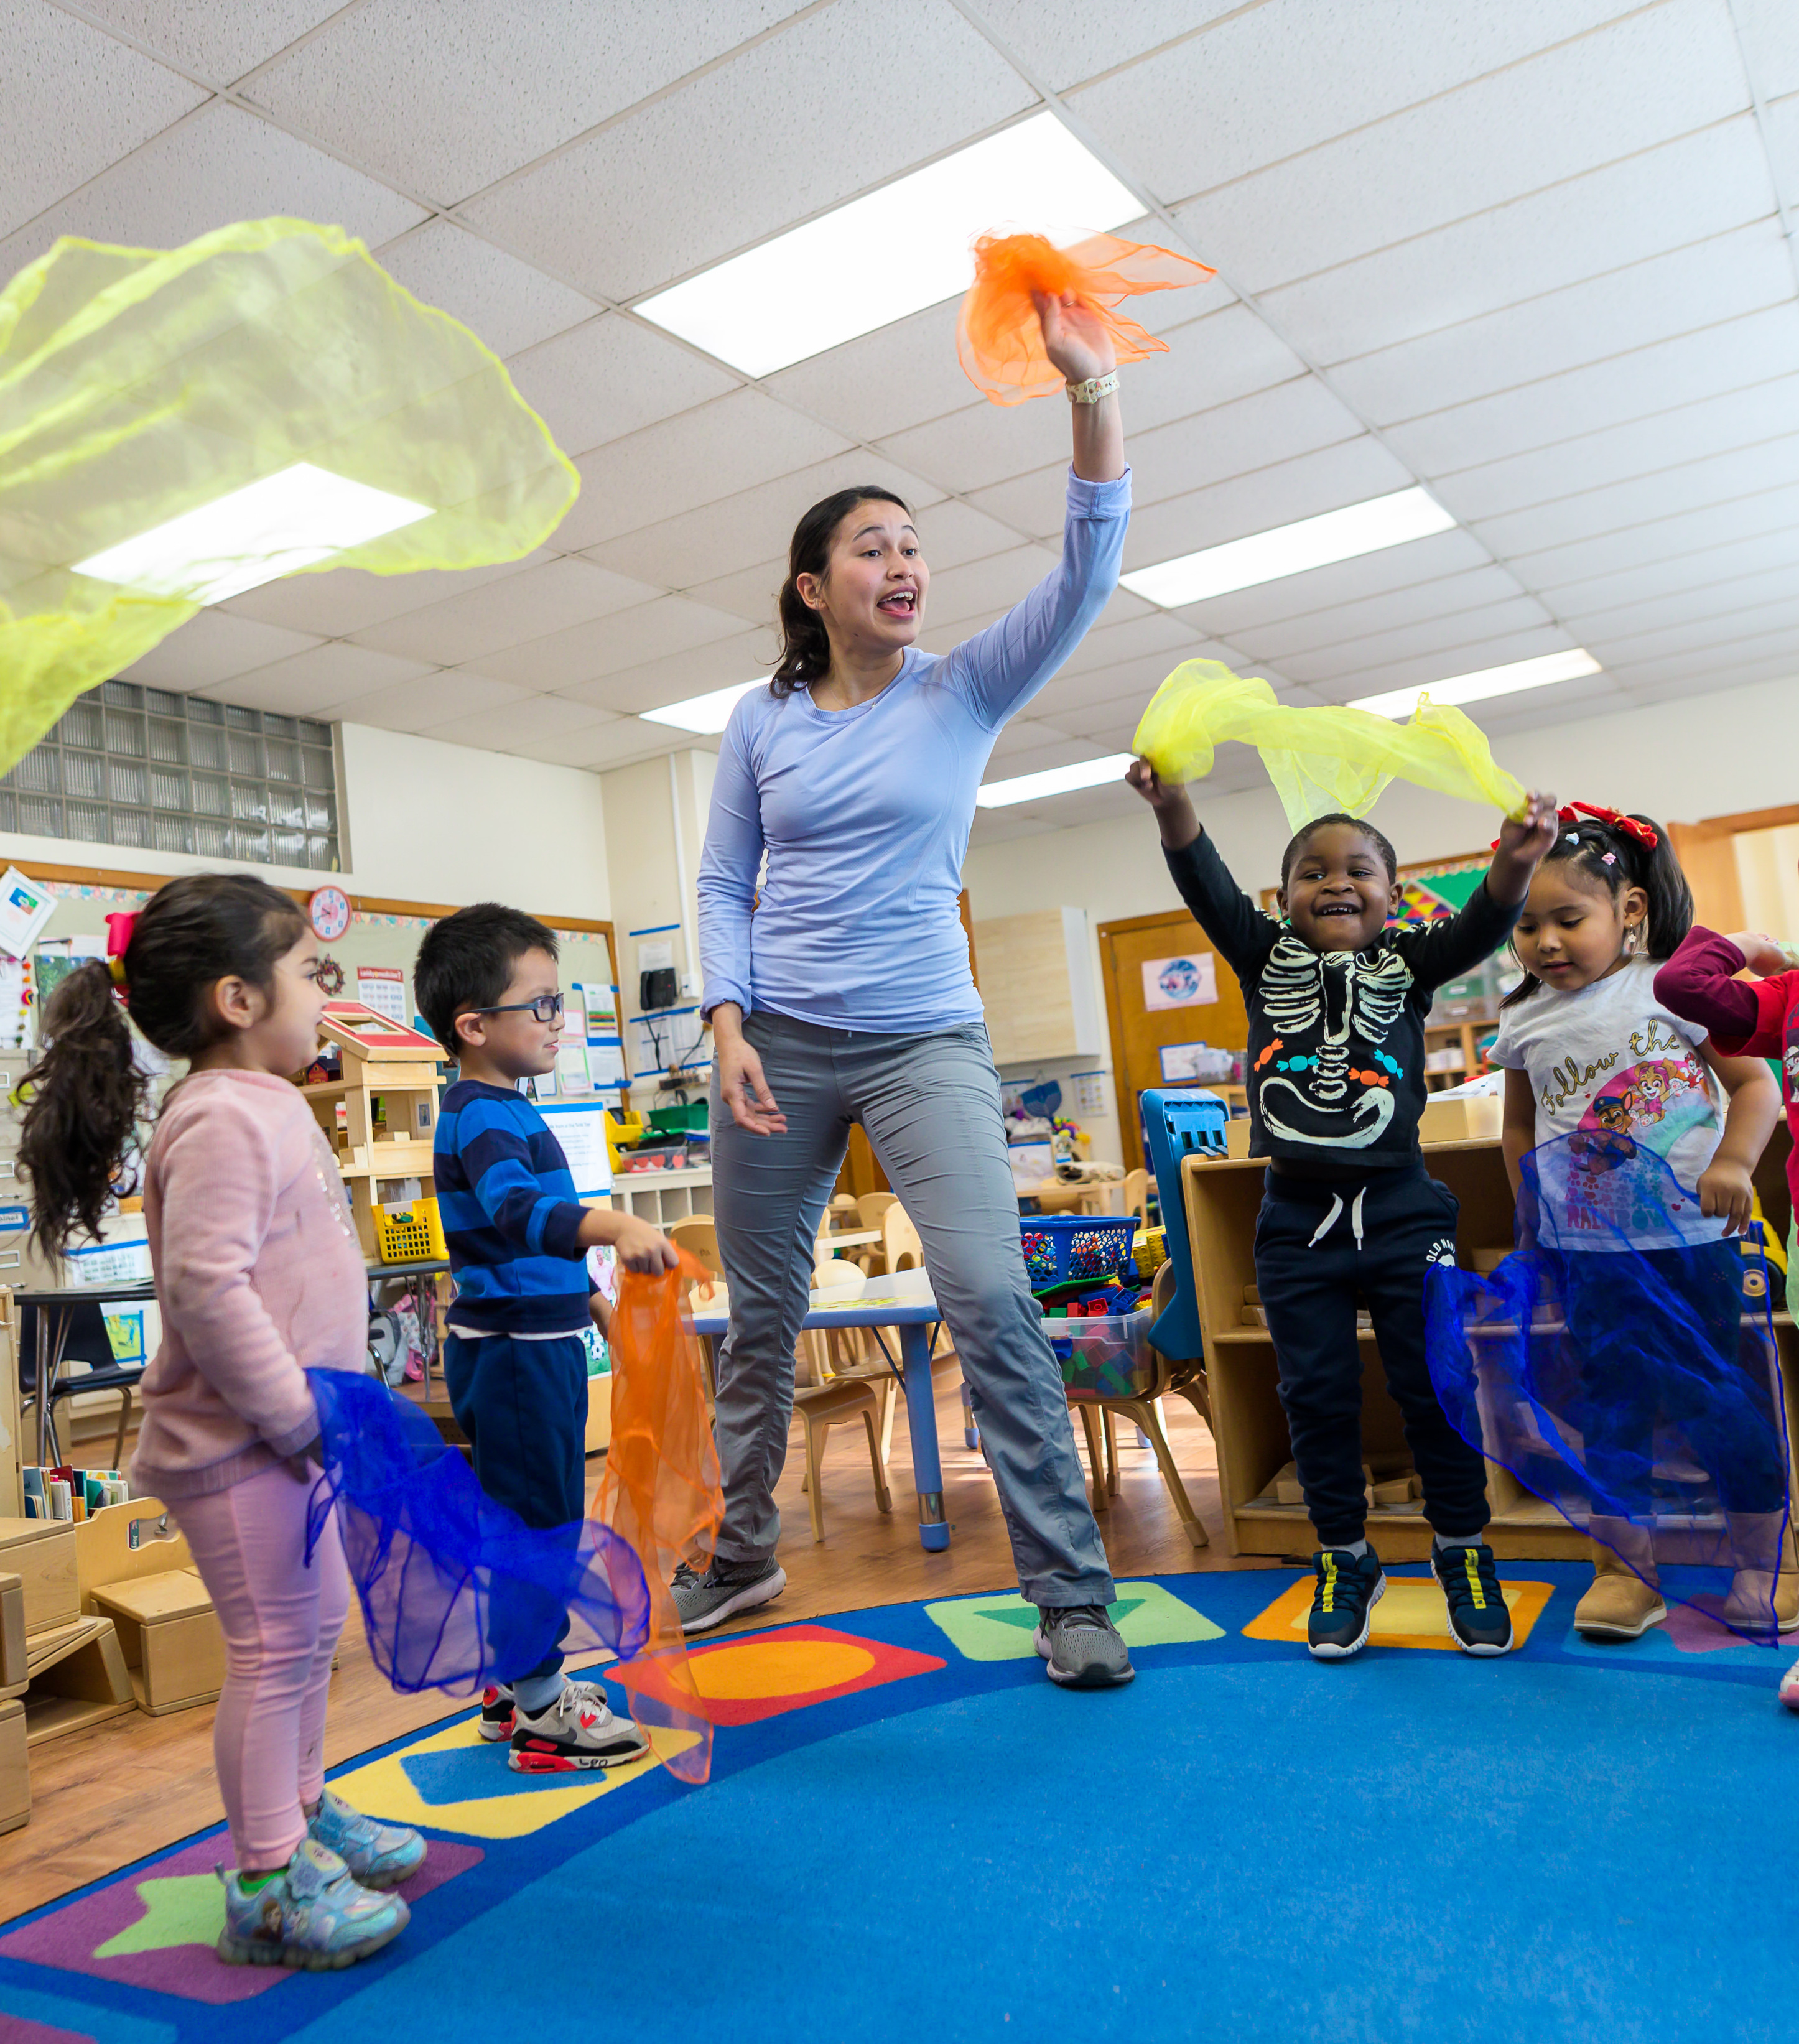 a wolf trap teaching artist is standing in a circle with young children in the middle of a classroom playing a learning game with colorful handkerchiefs